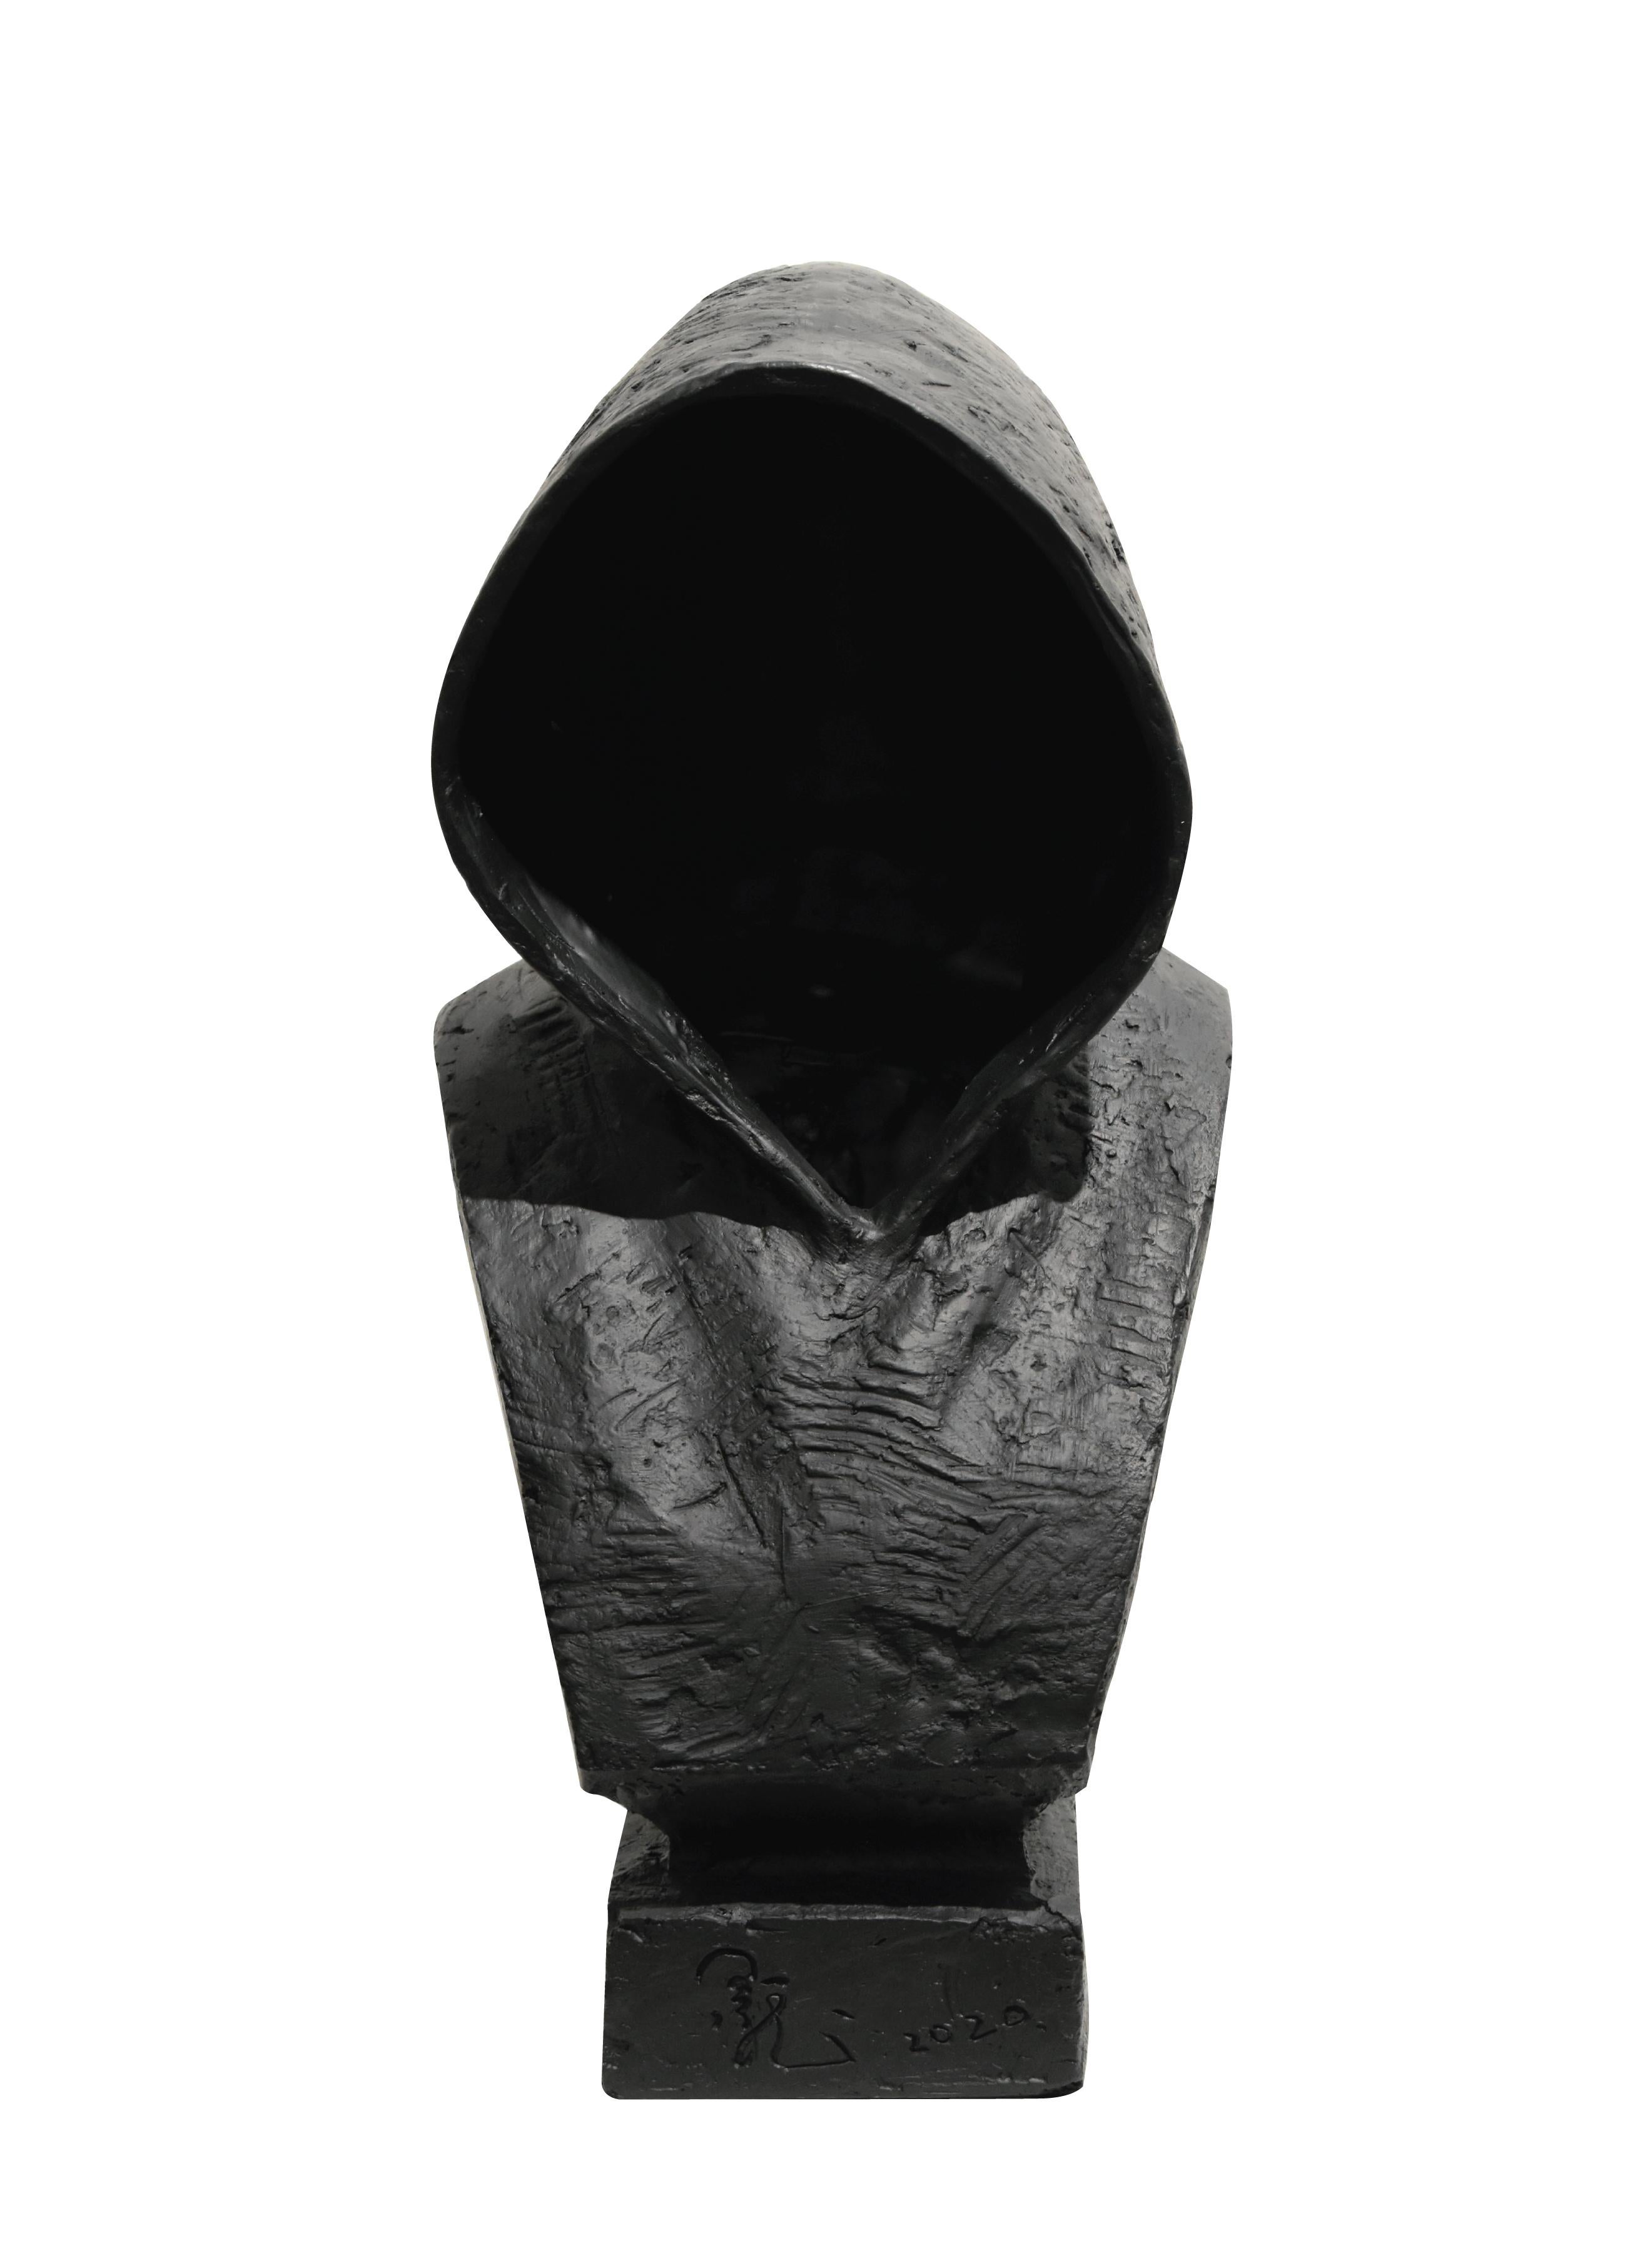 Quality Resin Made Bust Sculpture In Black Faceless Hooded Figure, Desktop sized